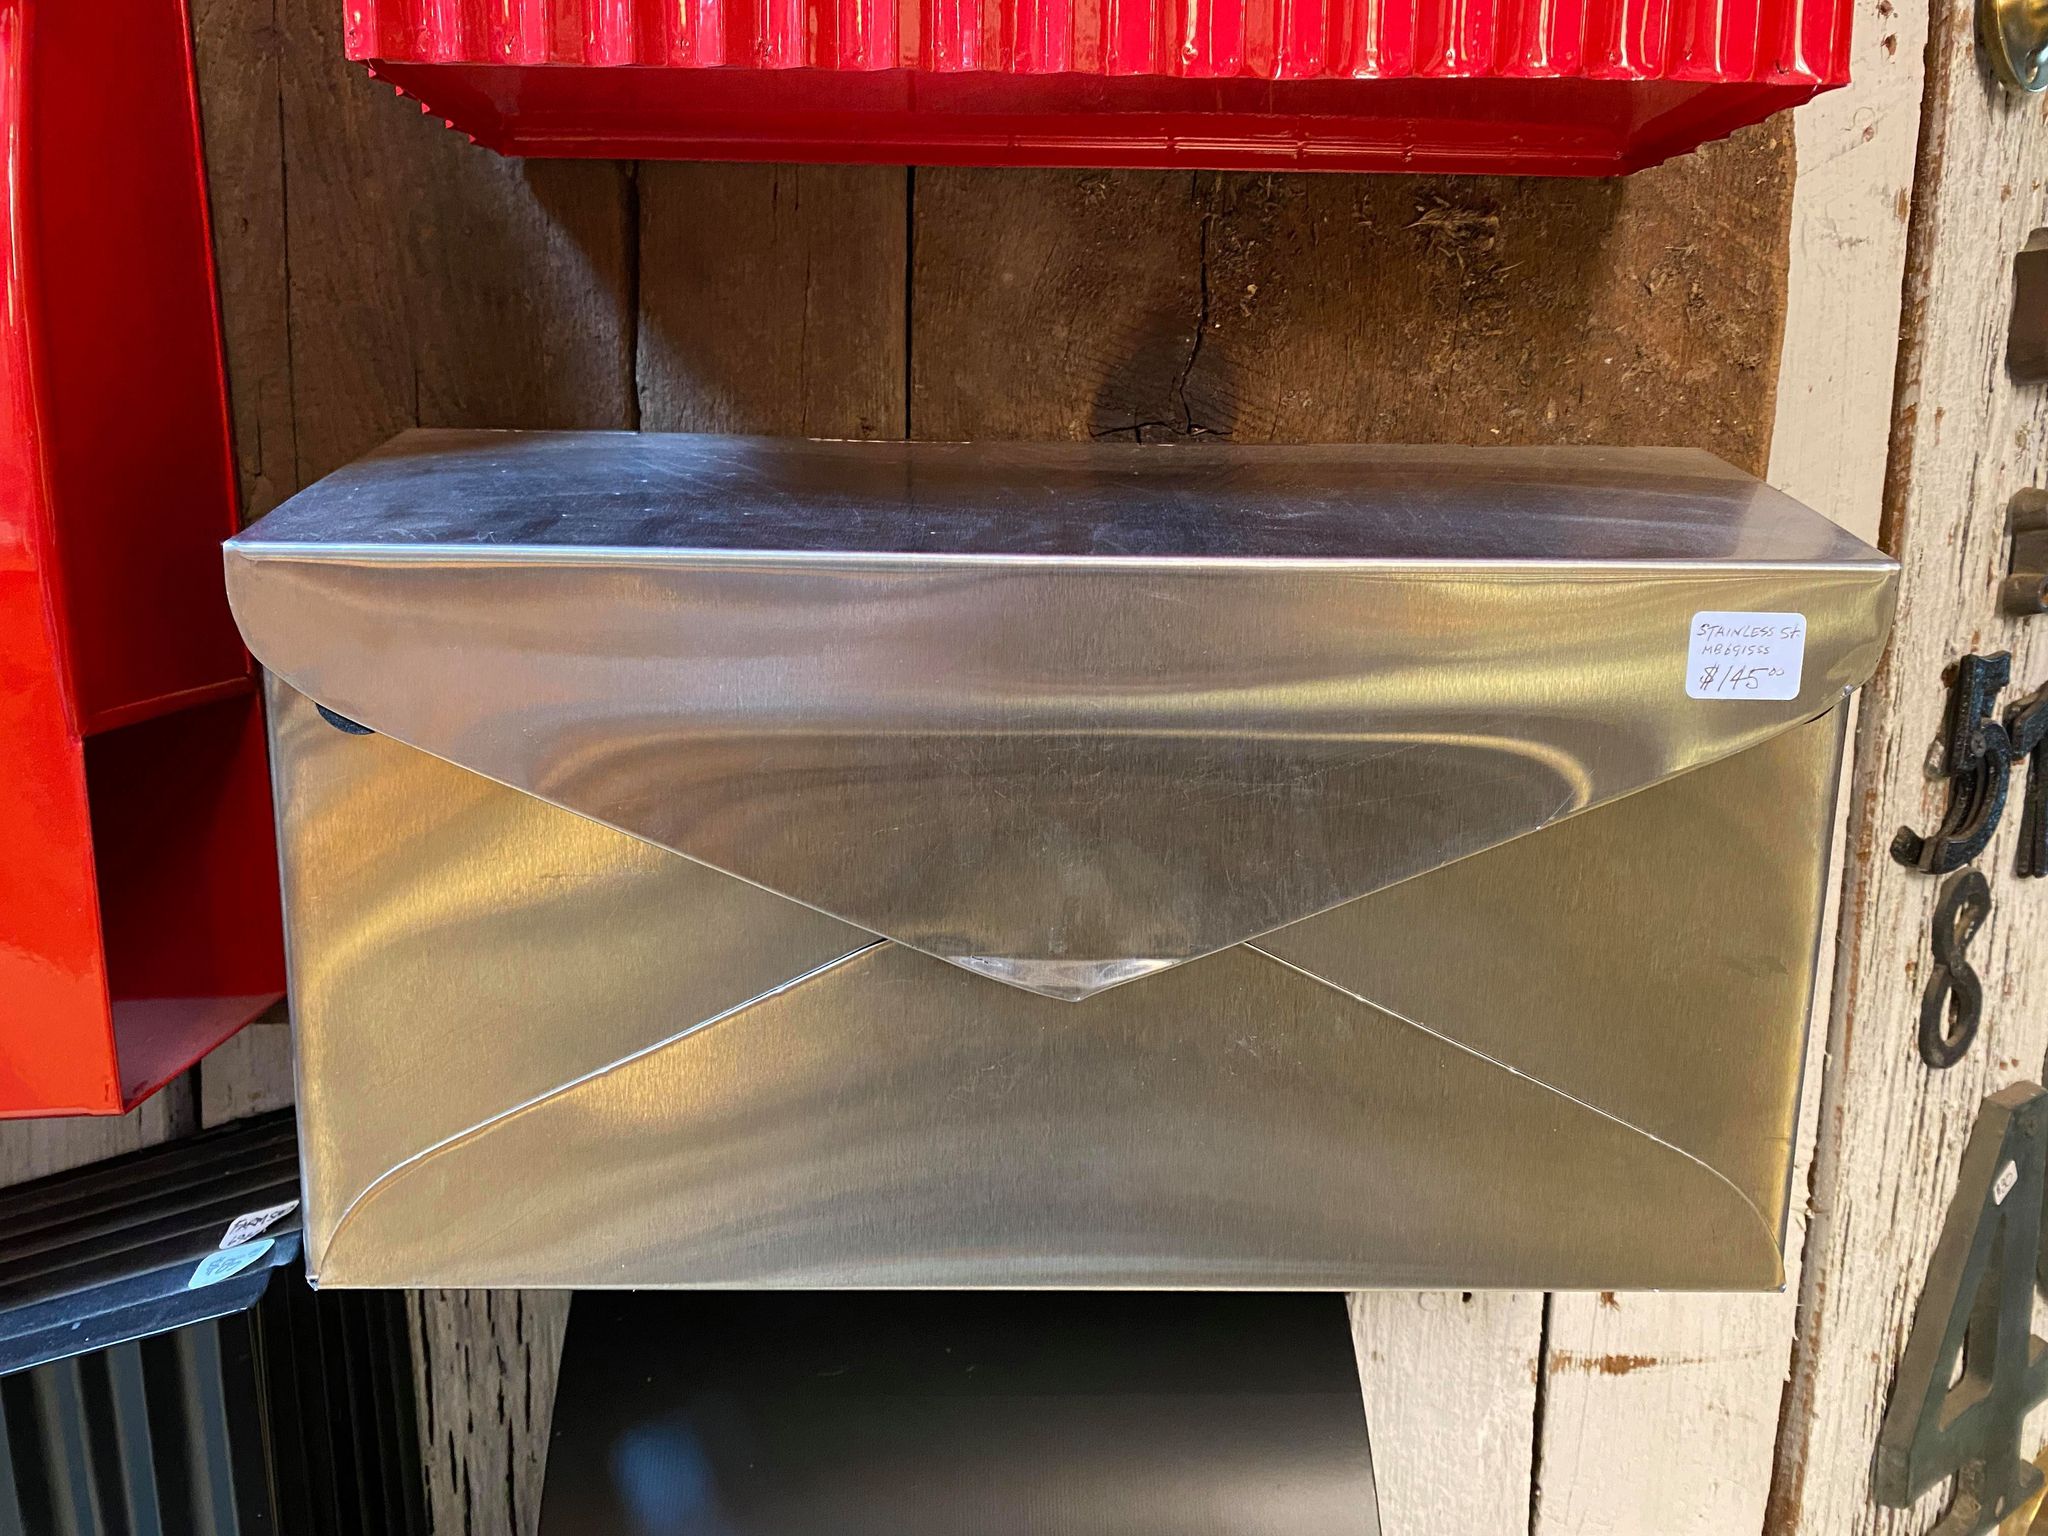 Stainless Steel Mailbox